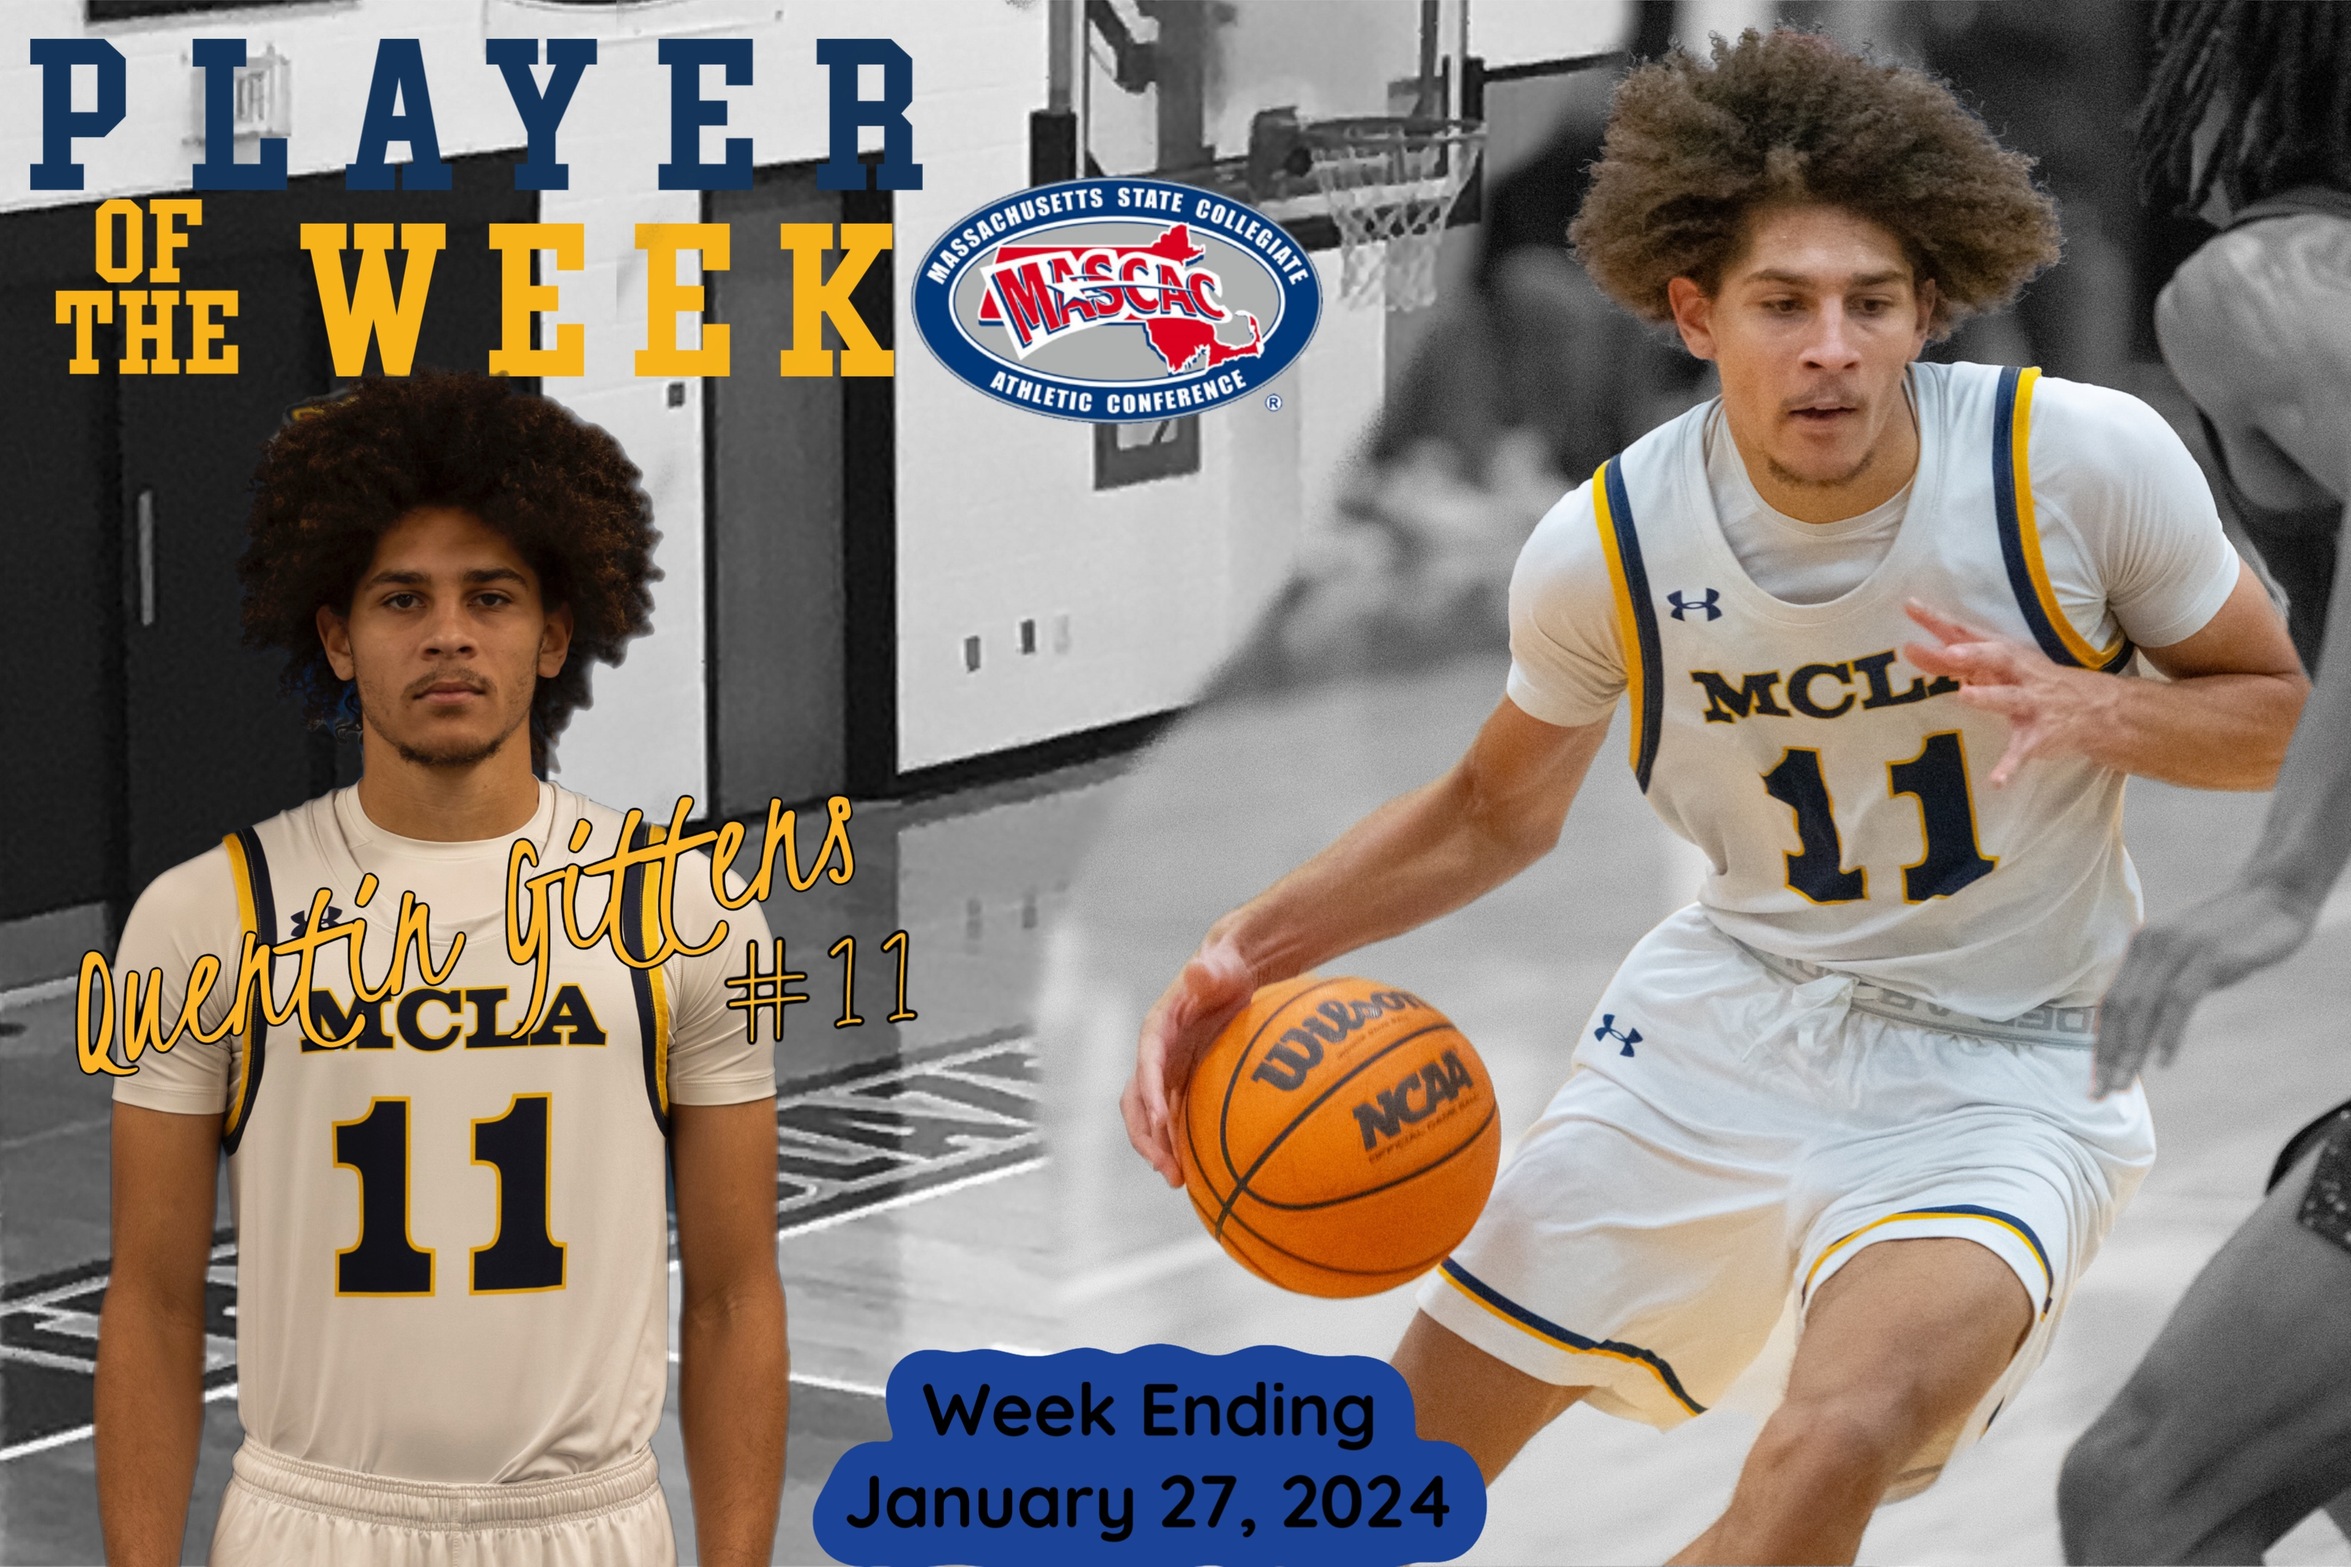 MCLA's Quentin Gittens goes back-to-back and earns second MASCAC Player of the Week in as many weeks.